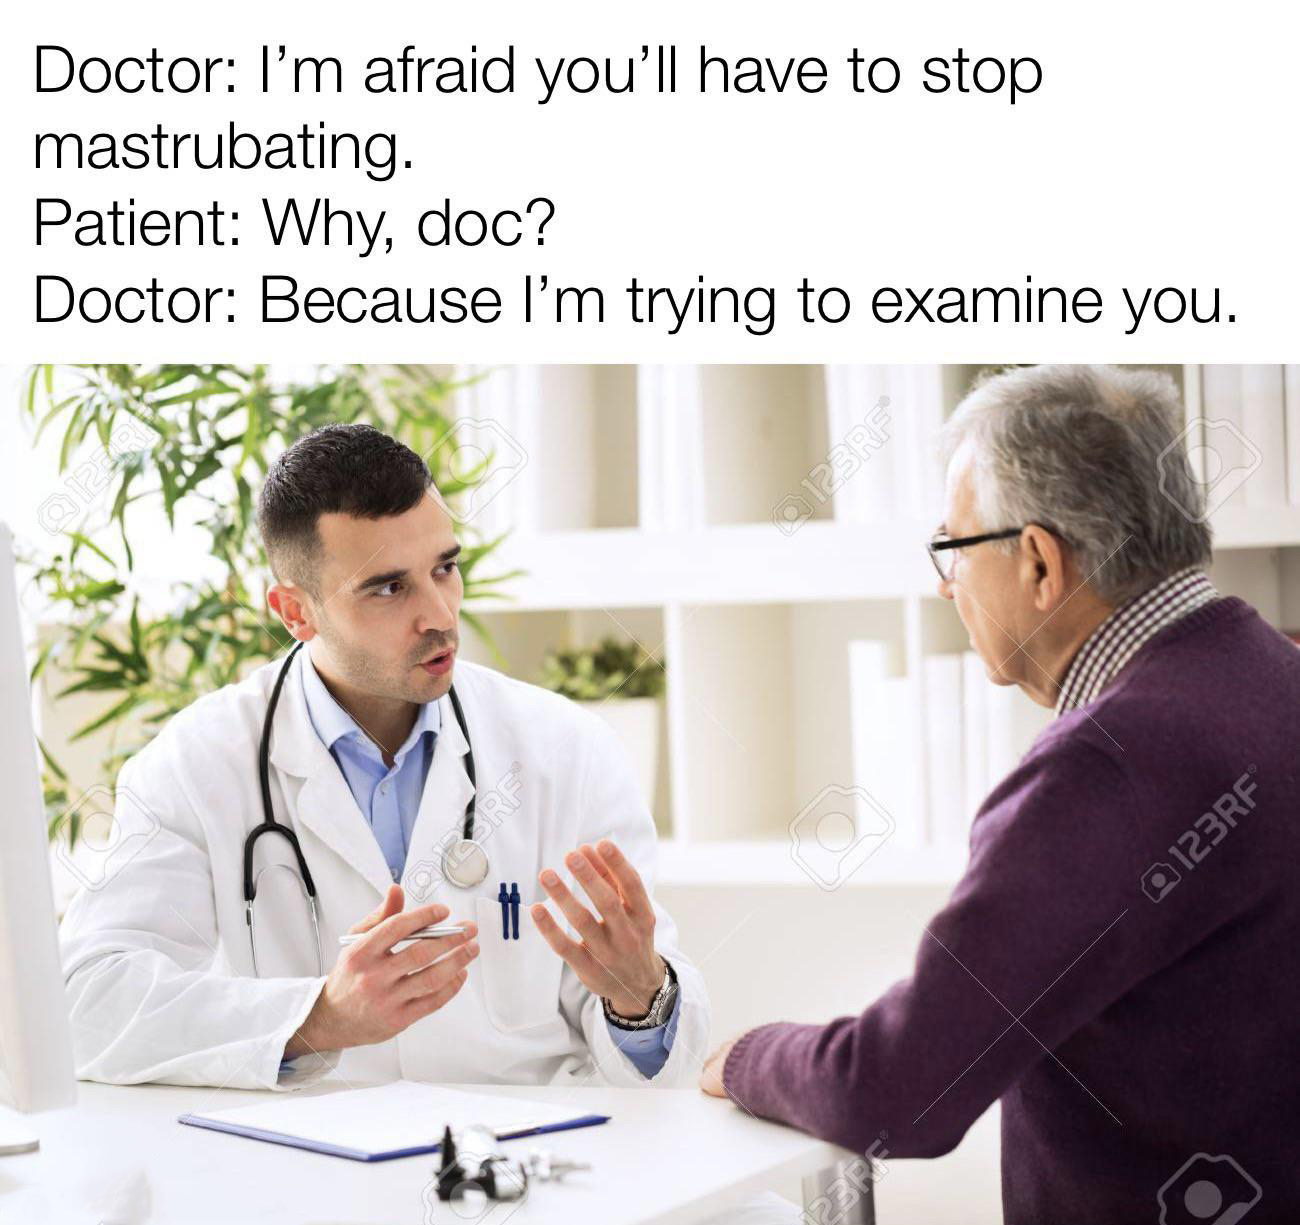 funny memes - dank memes - doctor discussion with patient - Doctor I'm afraid you'll have to stop mastrubating. Patient Why, doc? Doctor Because I'm trying to examine you. 0123RF